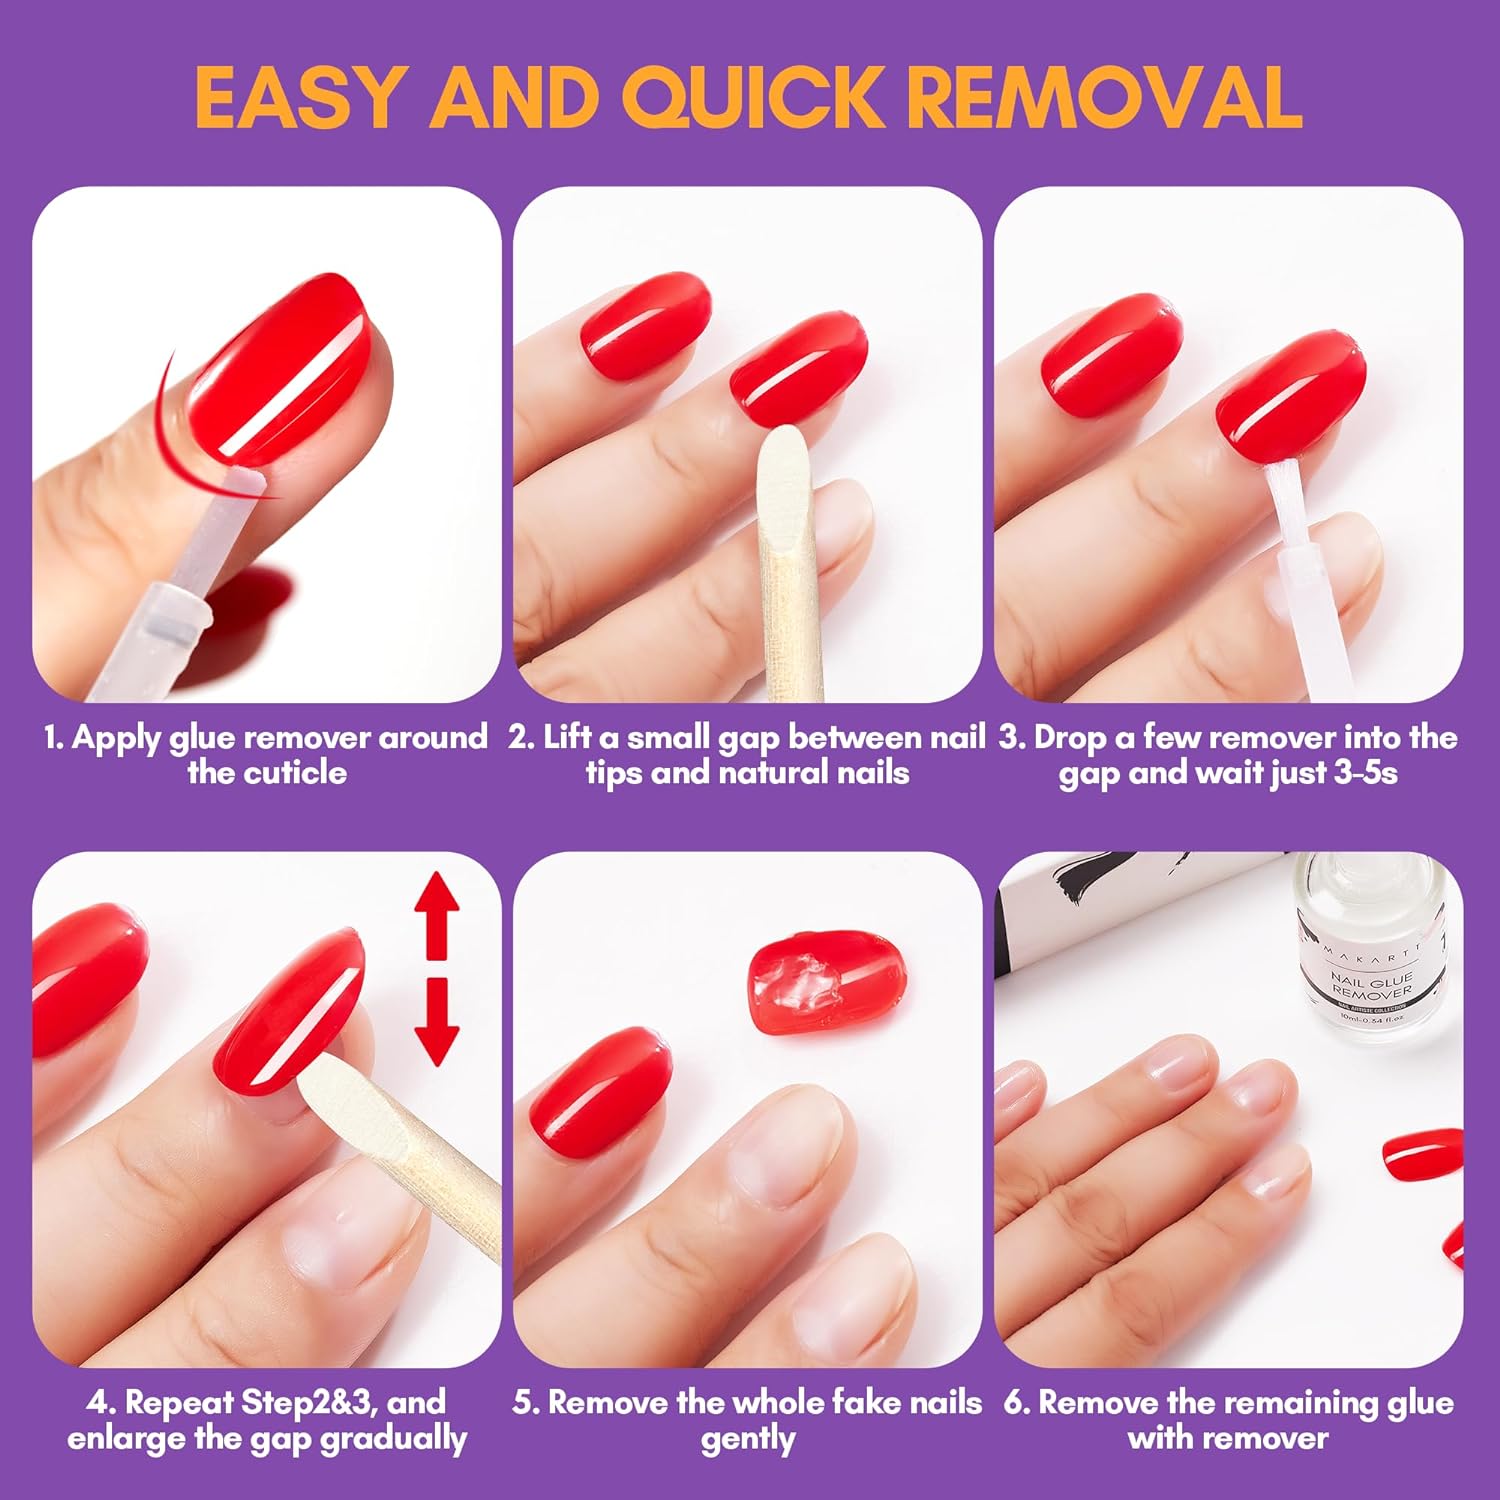 Remove Your Acrylic Nails Safely and In No Time | Glaminati